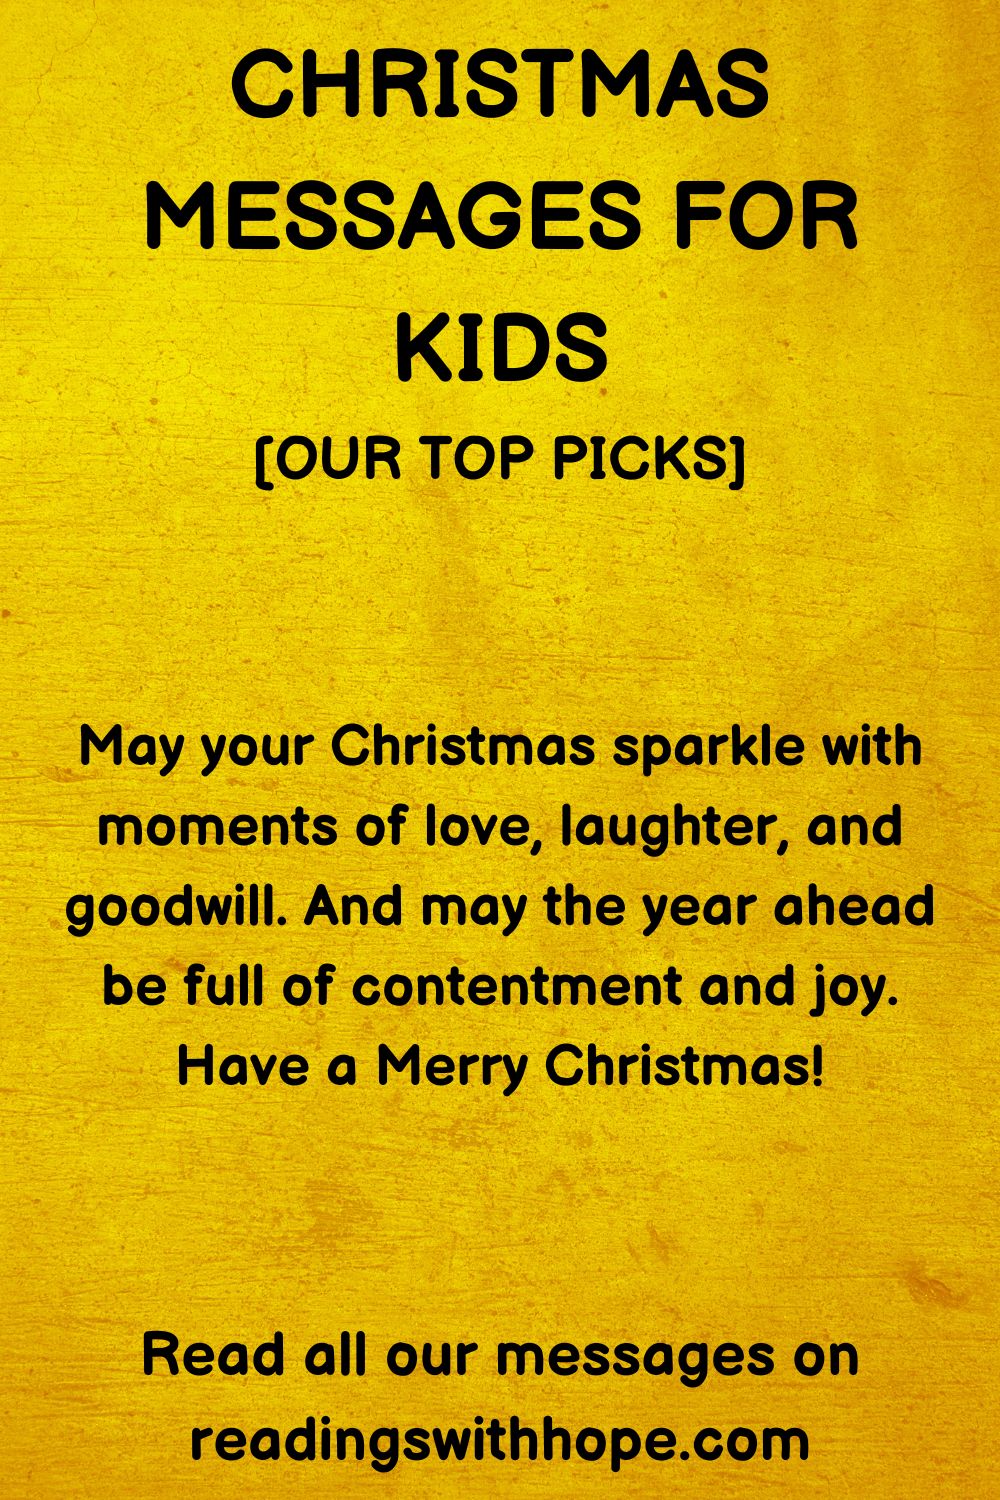 60 Christmas Messages for Kids